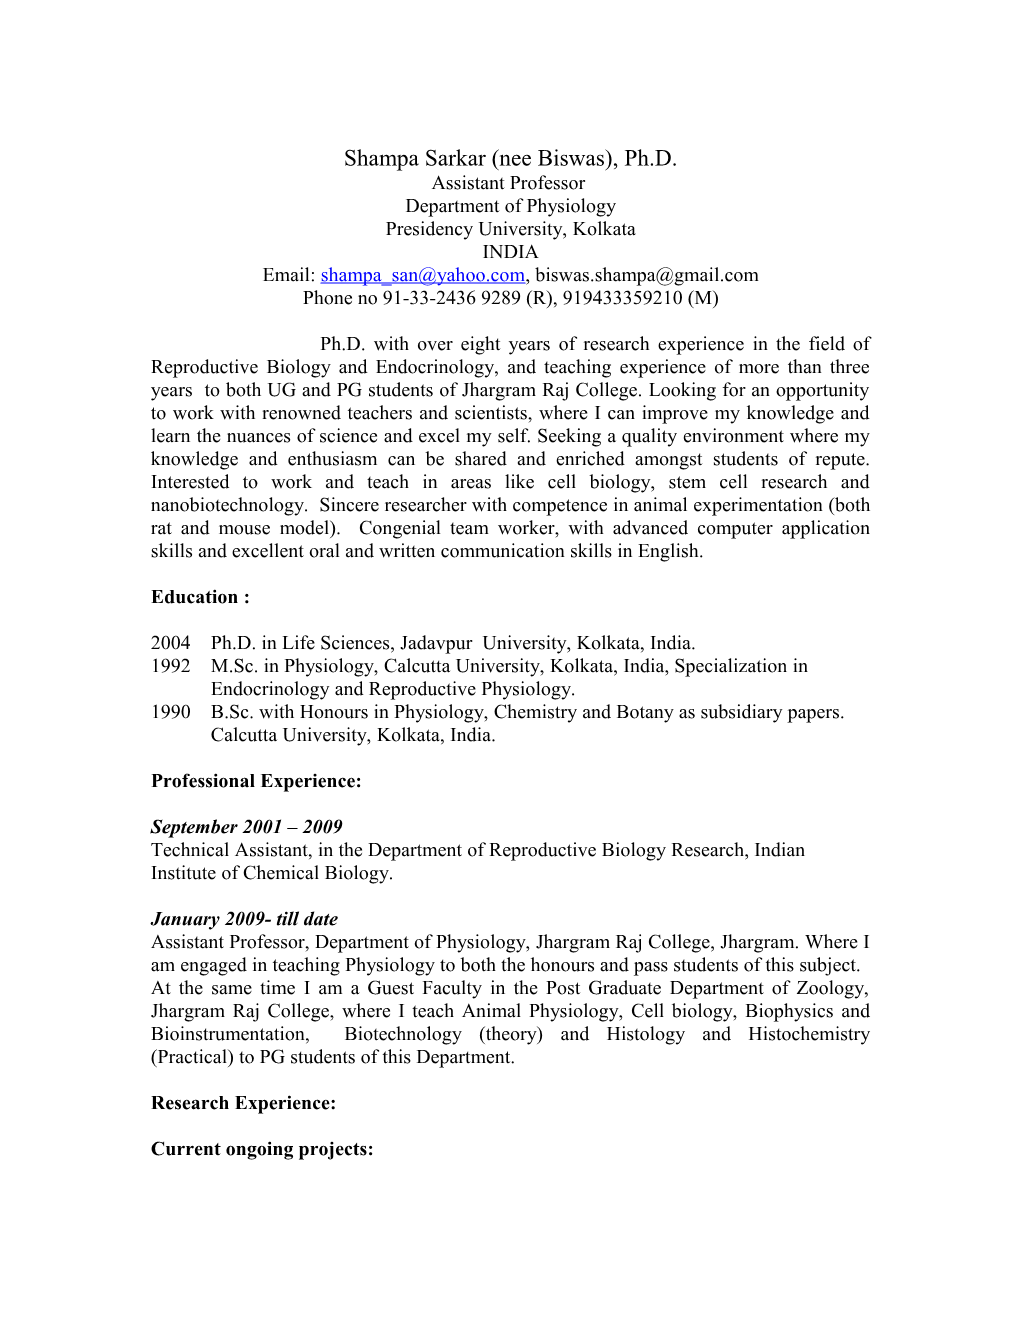 Subject: Application for a Postdoctoral Position